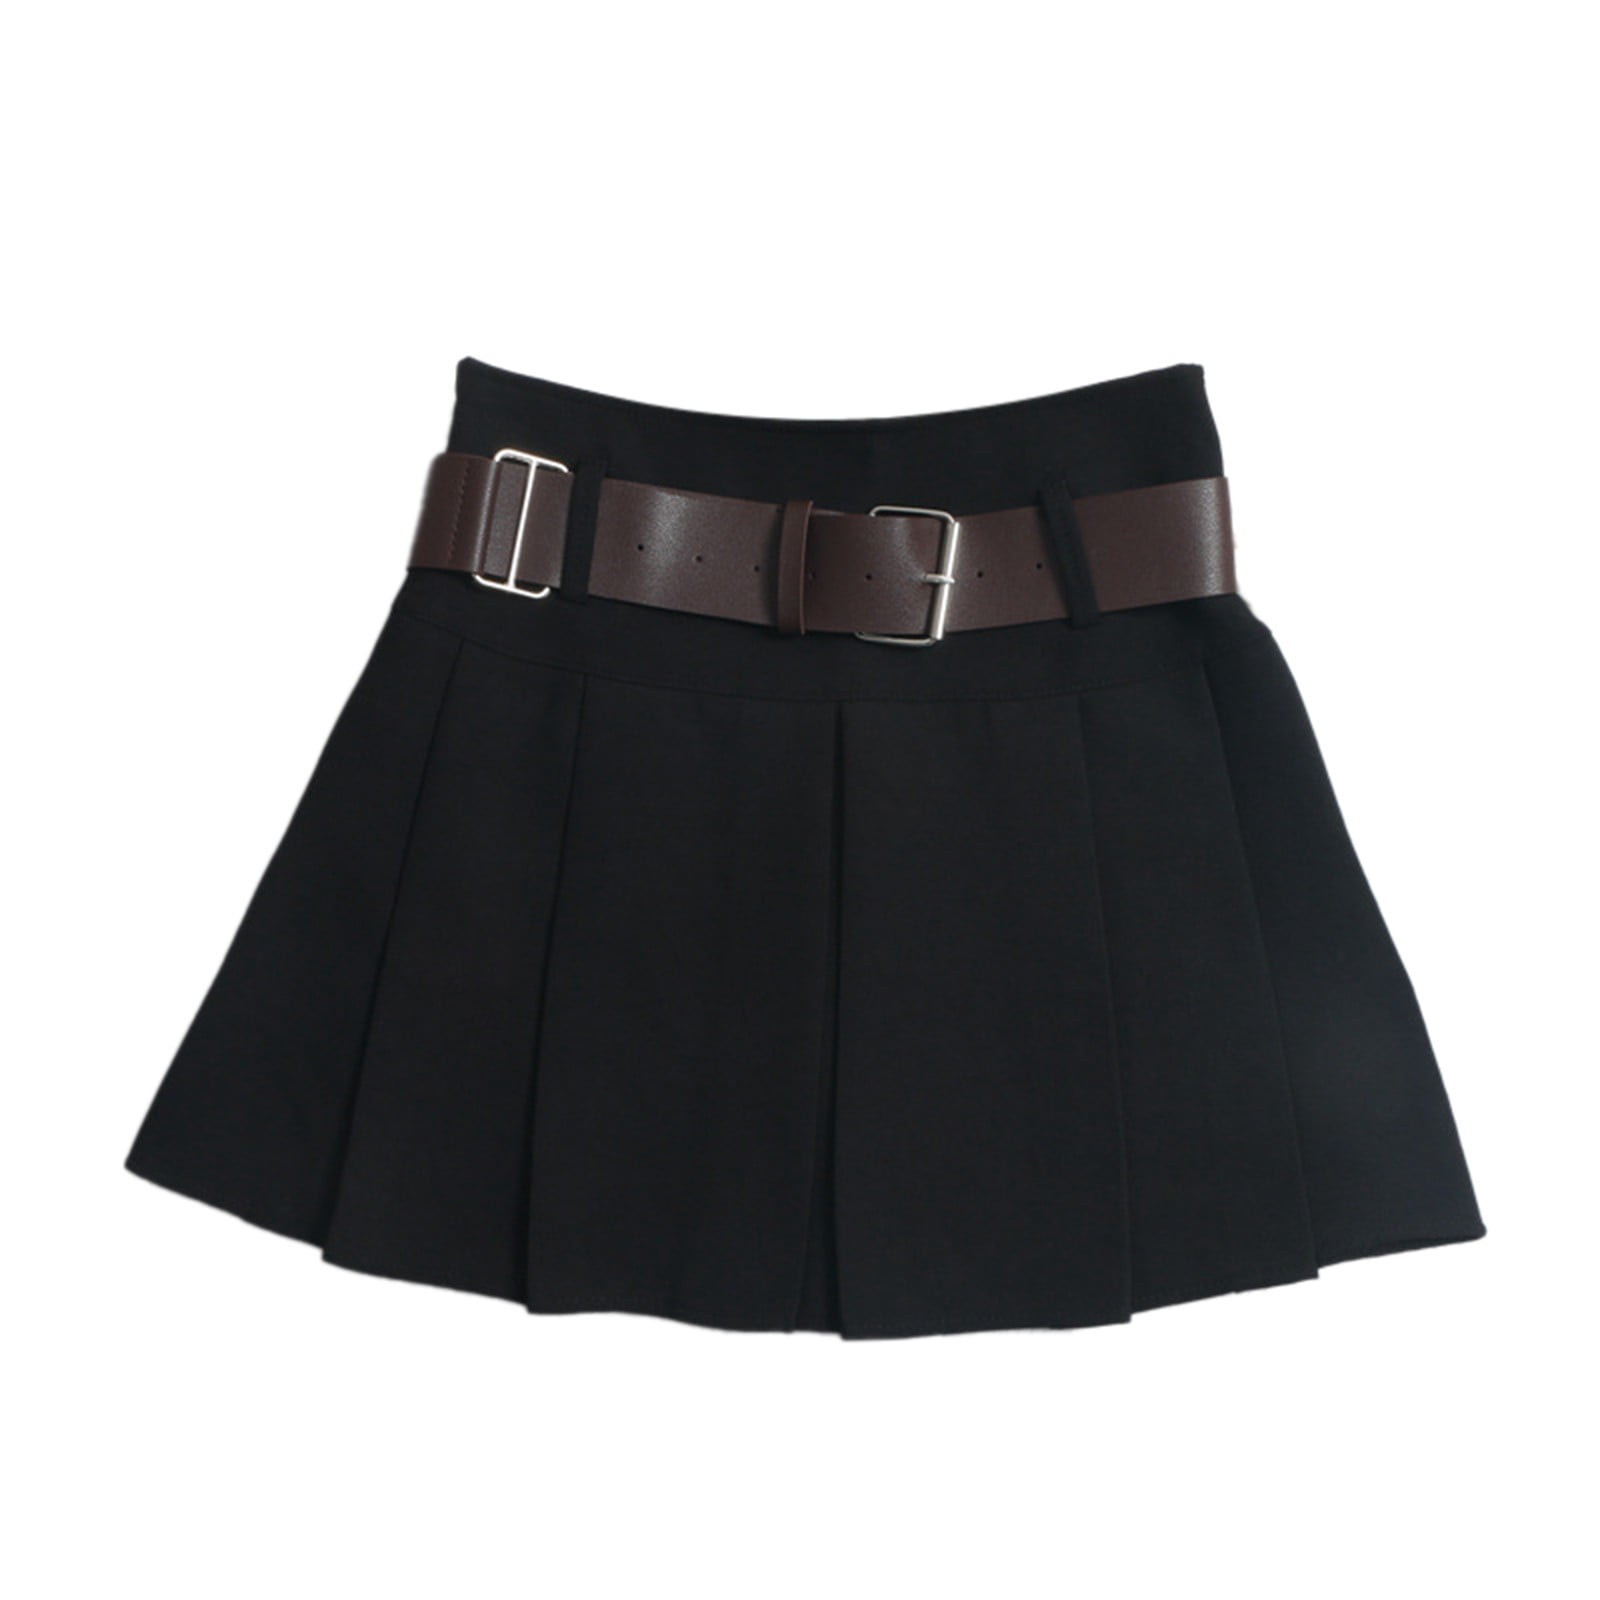 xiuh women's solid color high waist mini skirt with belt pleated a-line ...